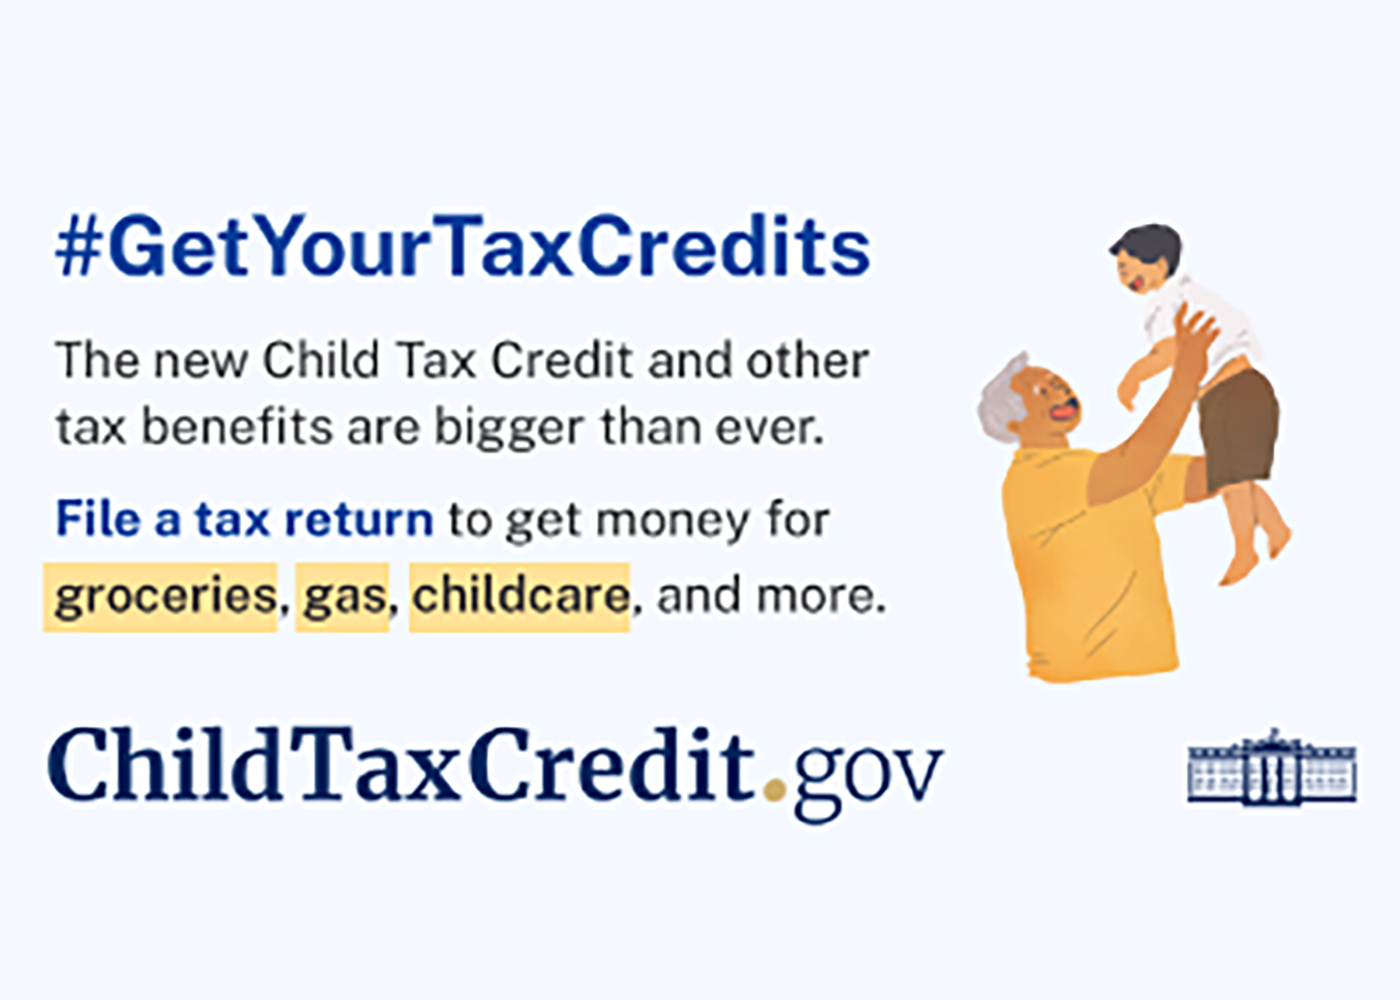 The new Child tax Credit and other tax benefits are bigger than ever. File a tax return and get money for groceries, gas, childcare, and more. ChildTaxCredit.gov